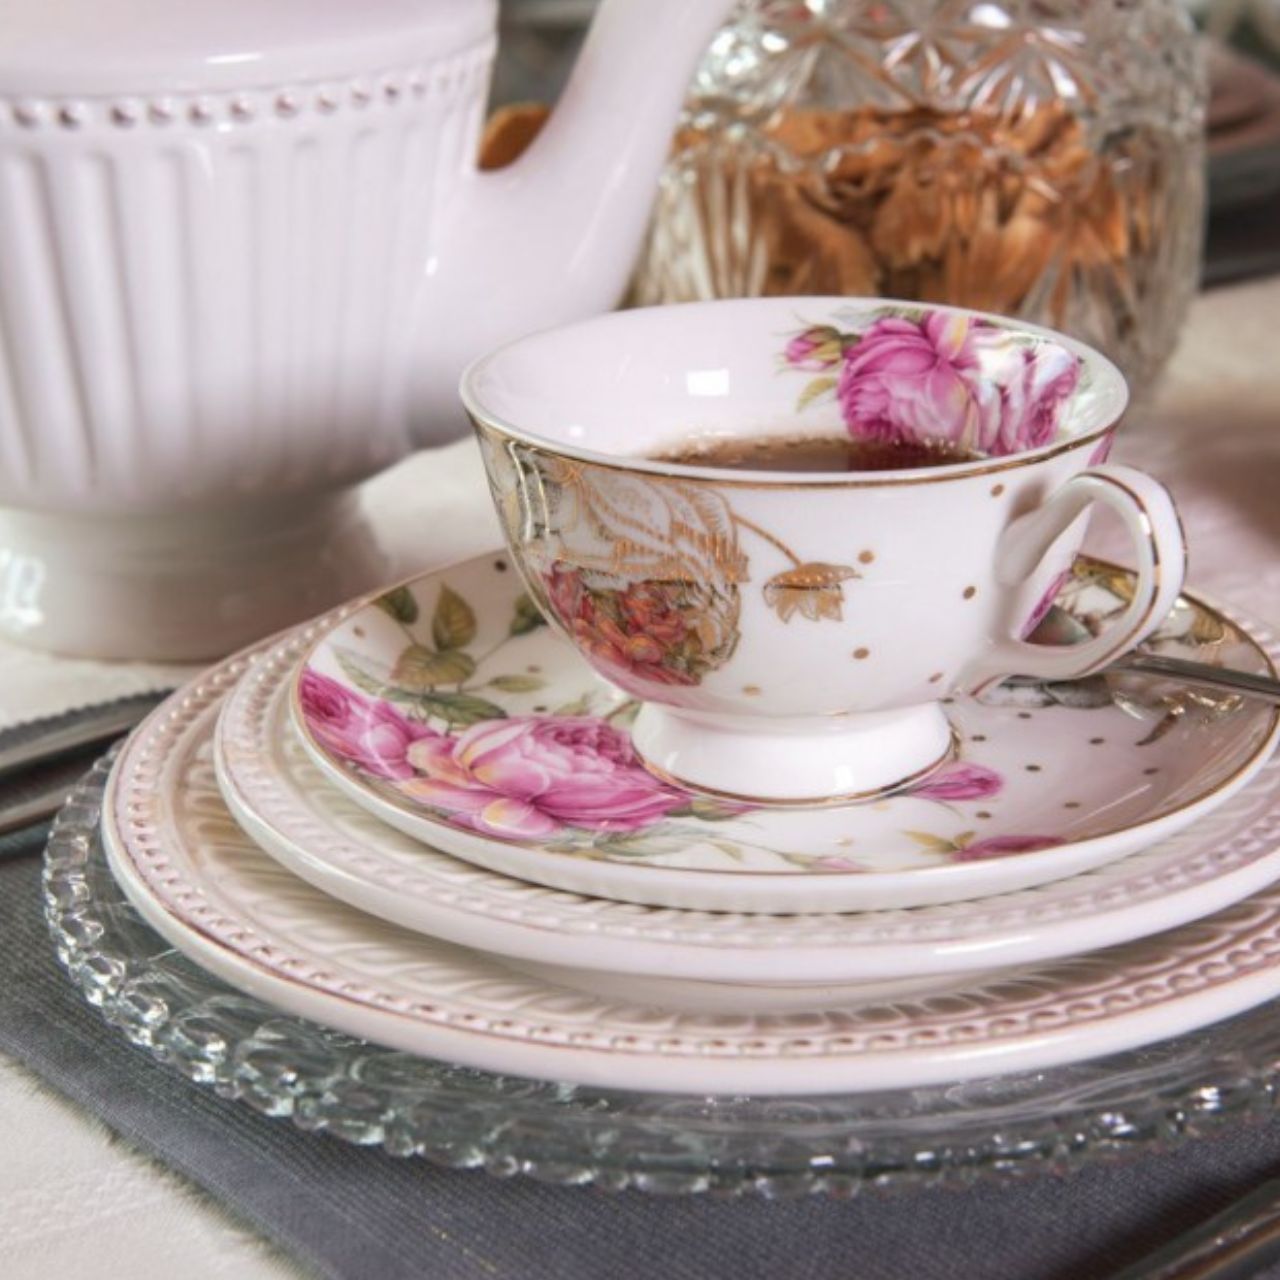 This premium porcelain cup and saucer set features a romantic floral design with pink flowers. Crafted to the highest quality standards, the elegant cup offers a delicate and eye-catching presentation. Enjoy your favourite beverage in style with this romantic cup and saucer set.